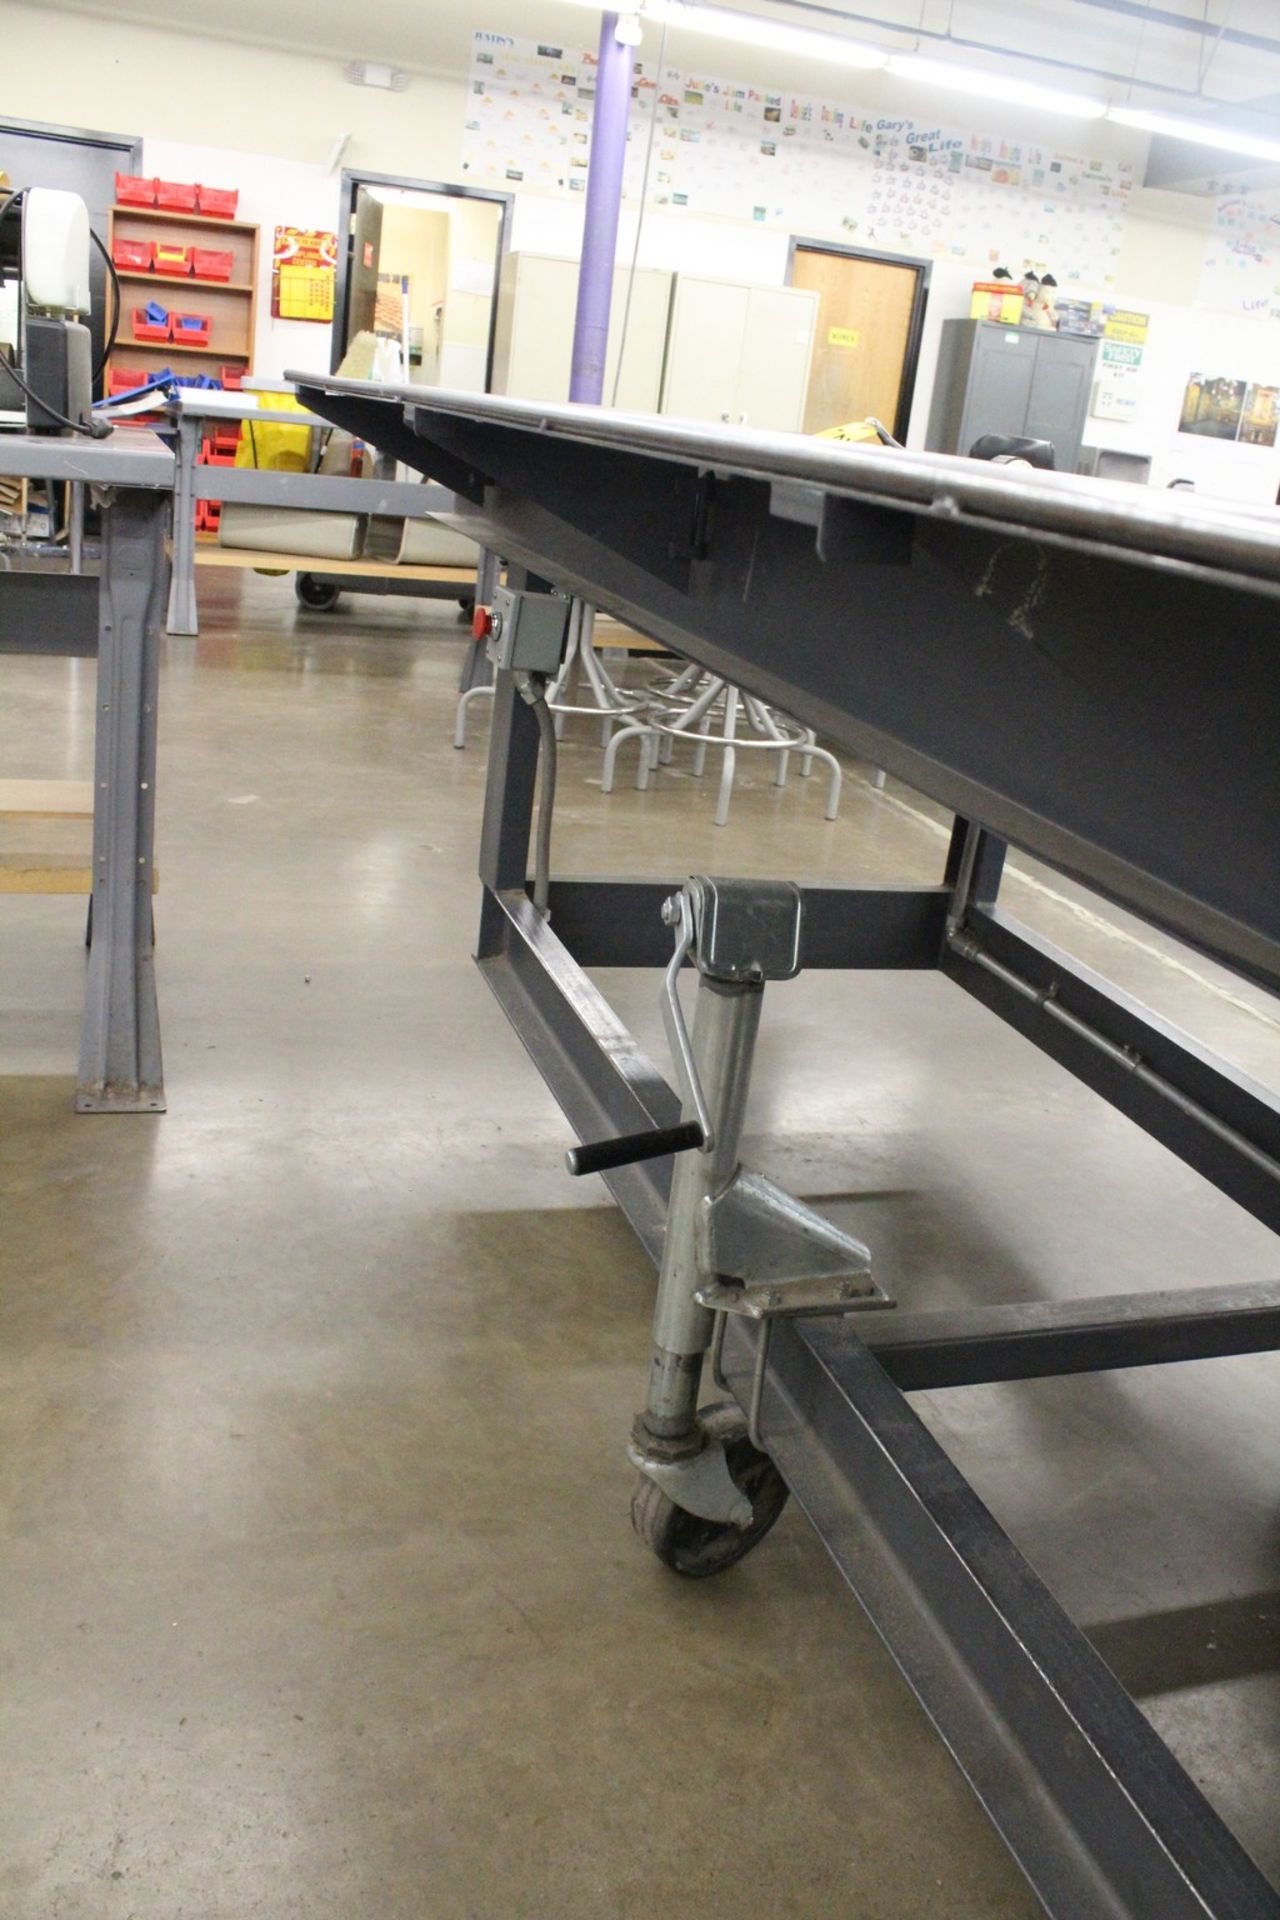 POWERED BELT CONVEYOR, APPROX 23'6" L X 24" W, WITH ALL RELATED MOTORS, STARTERS, SWITCHES, ETC. - Image 5 of 5